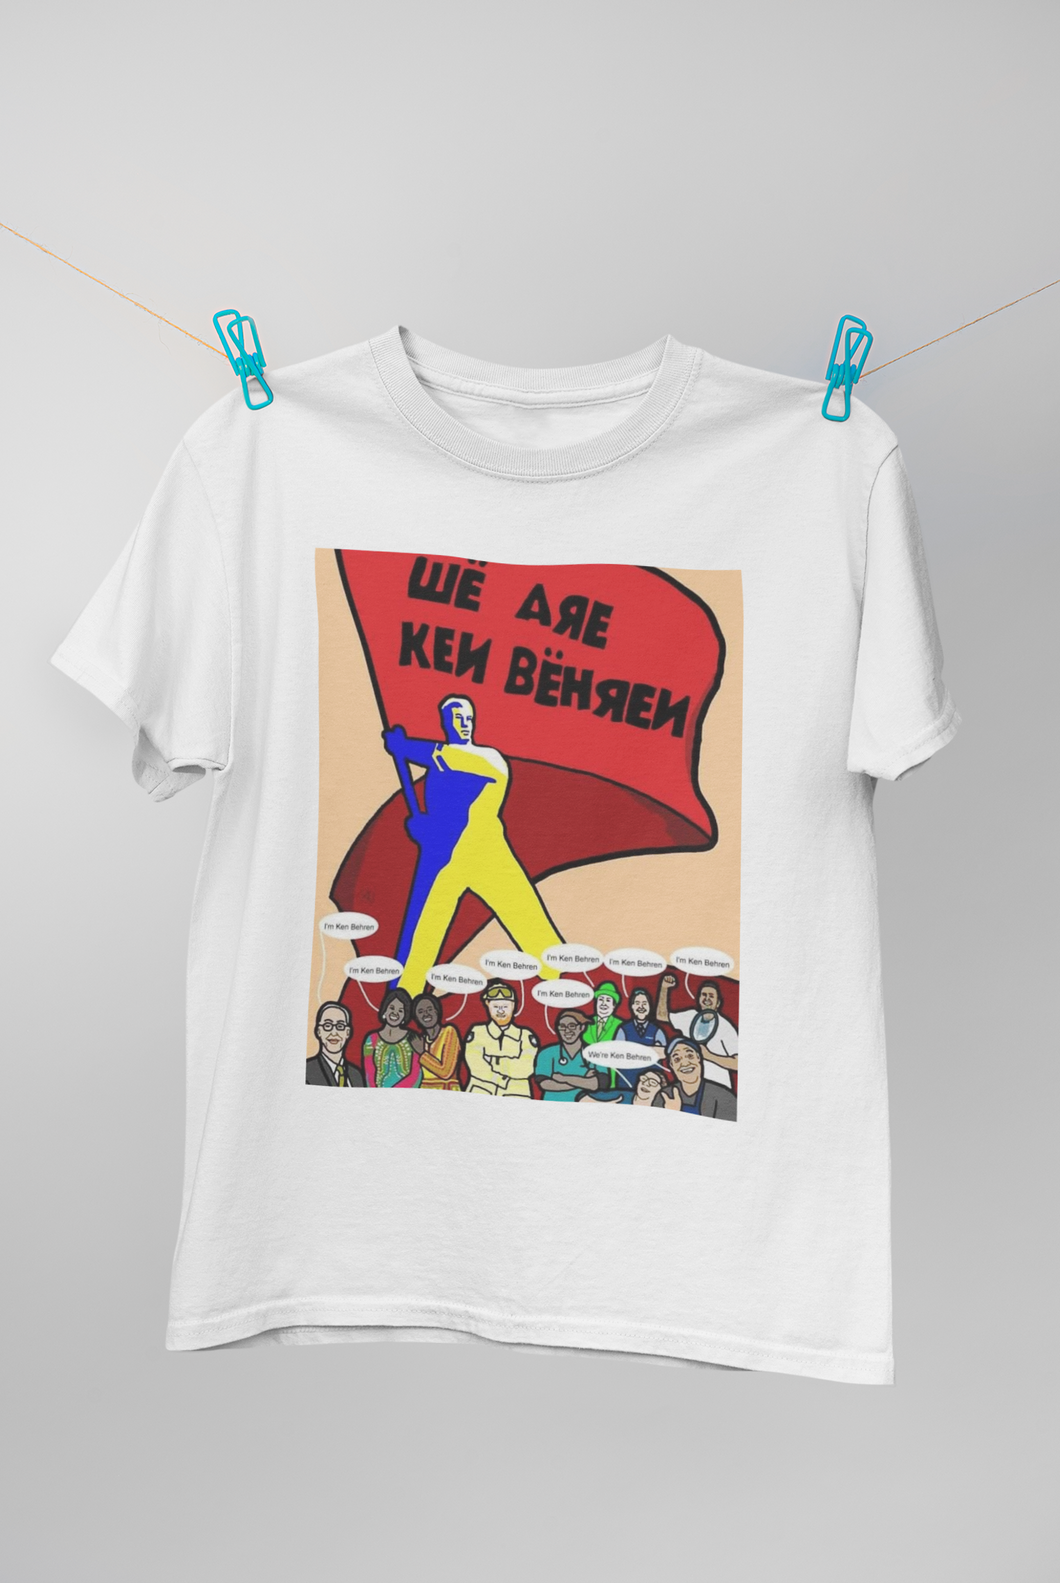 Leafy Sea Dragon Ken Behrens T-Shirt- All profits going to charity